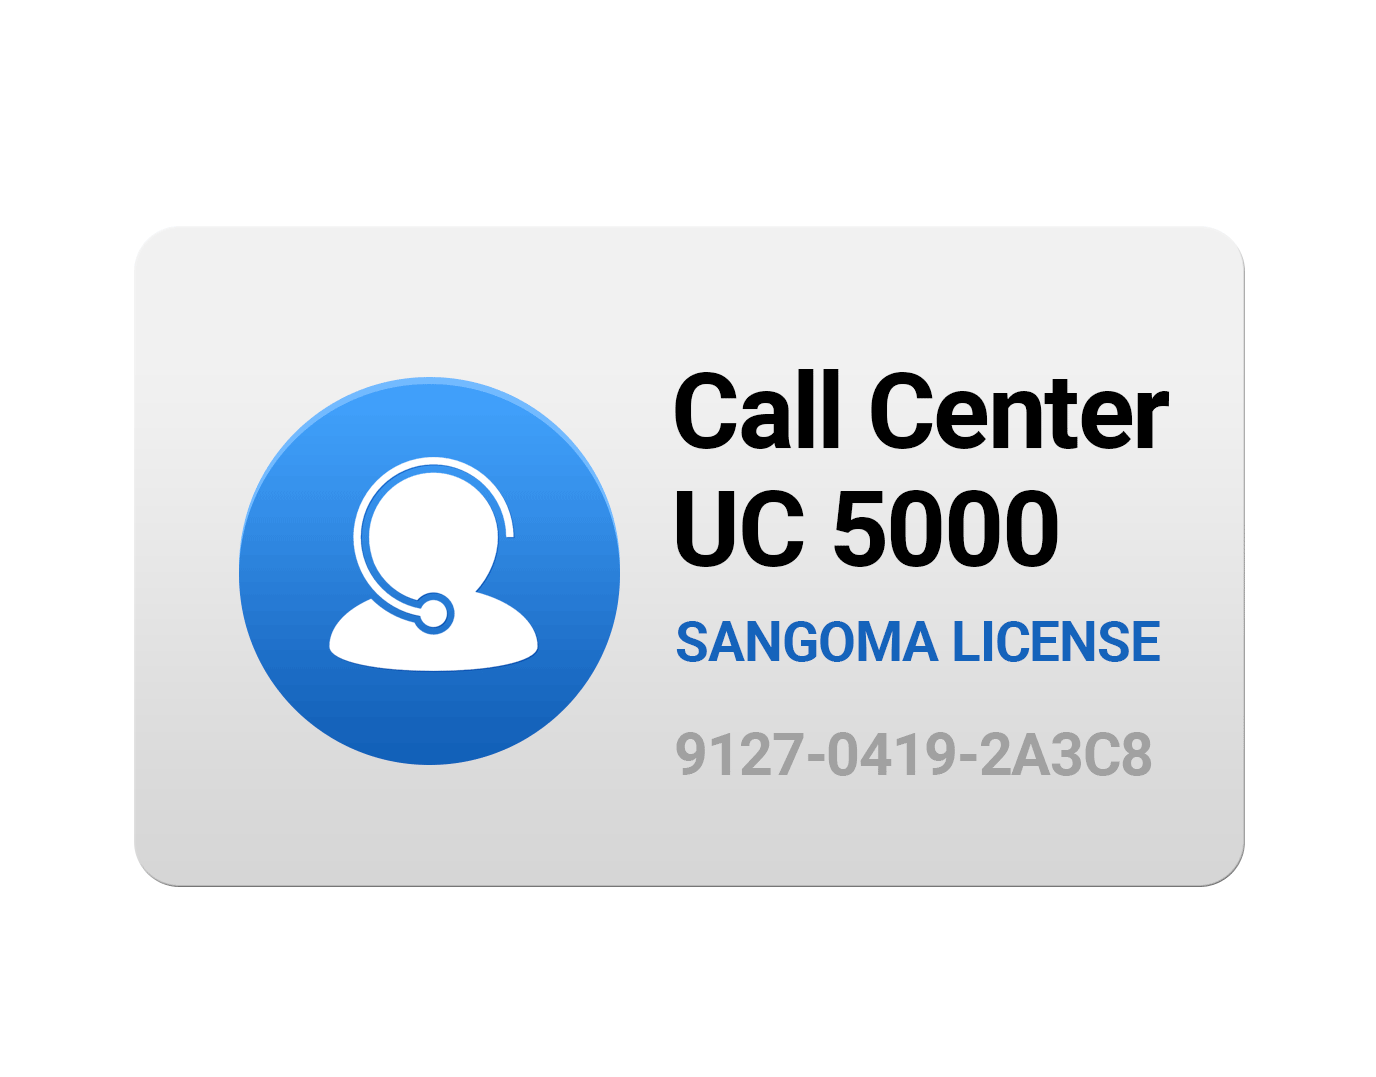 Call Center Features License for UC 5000